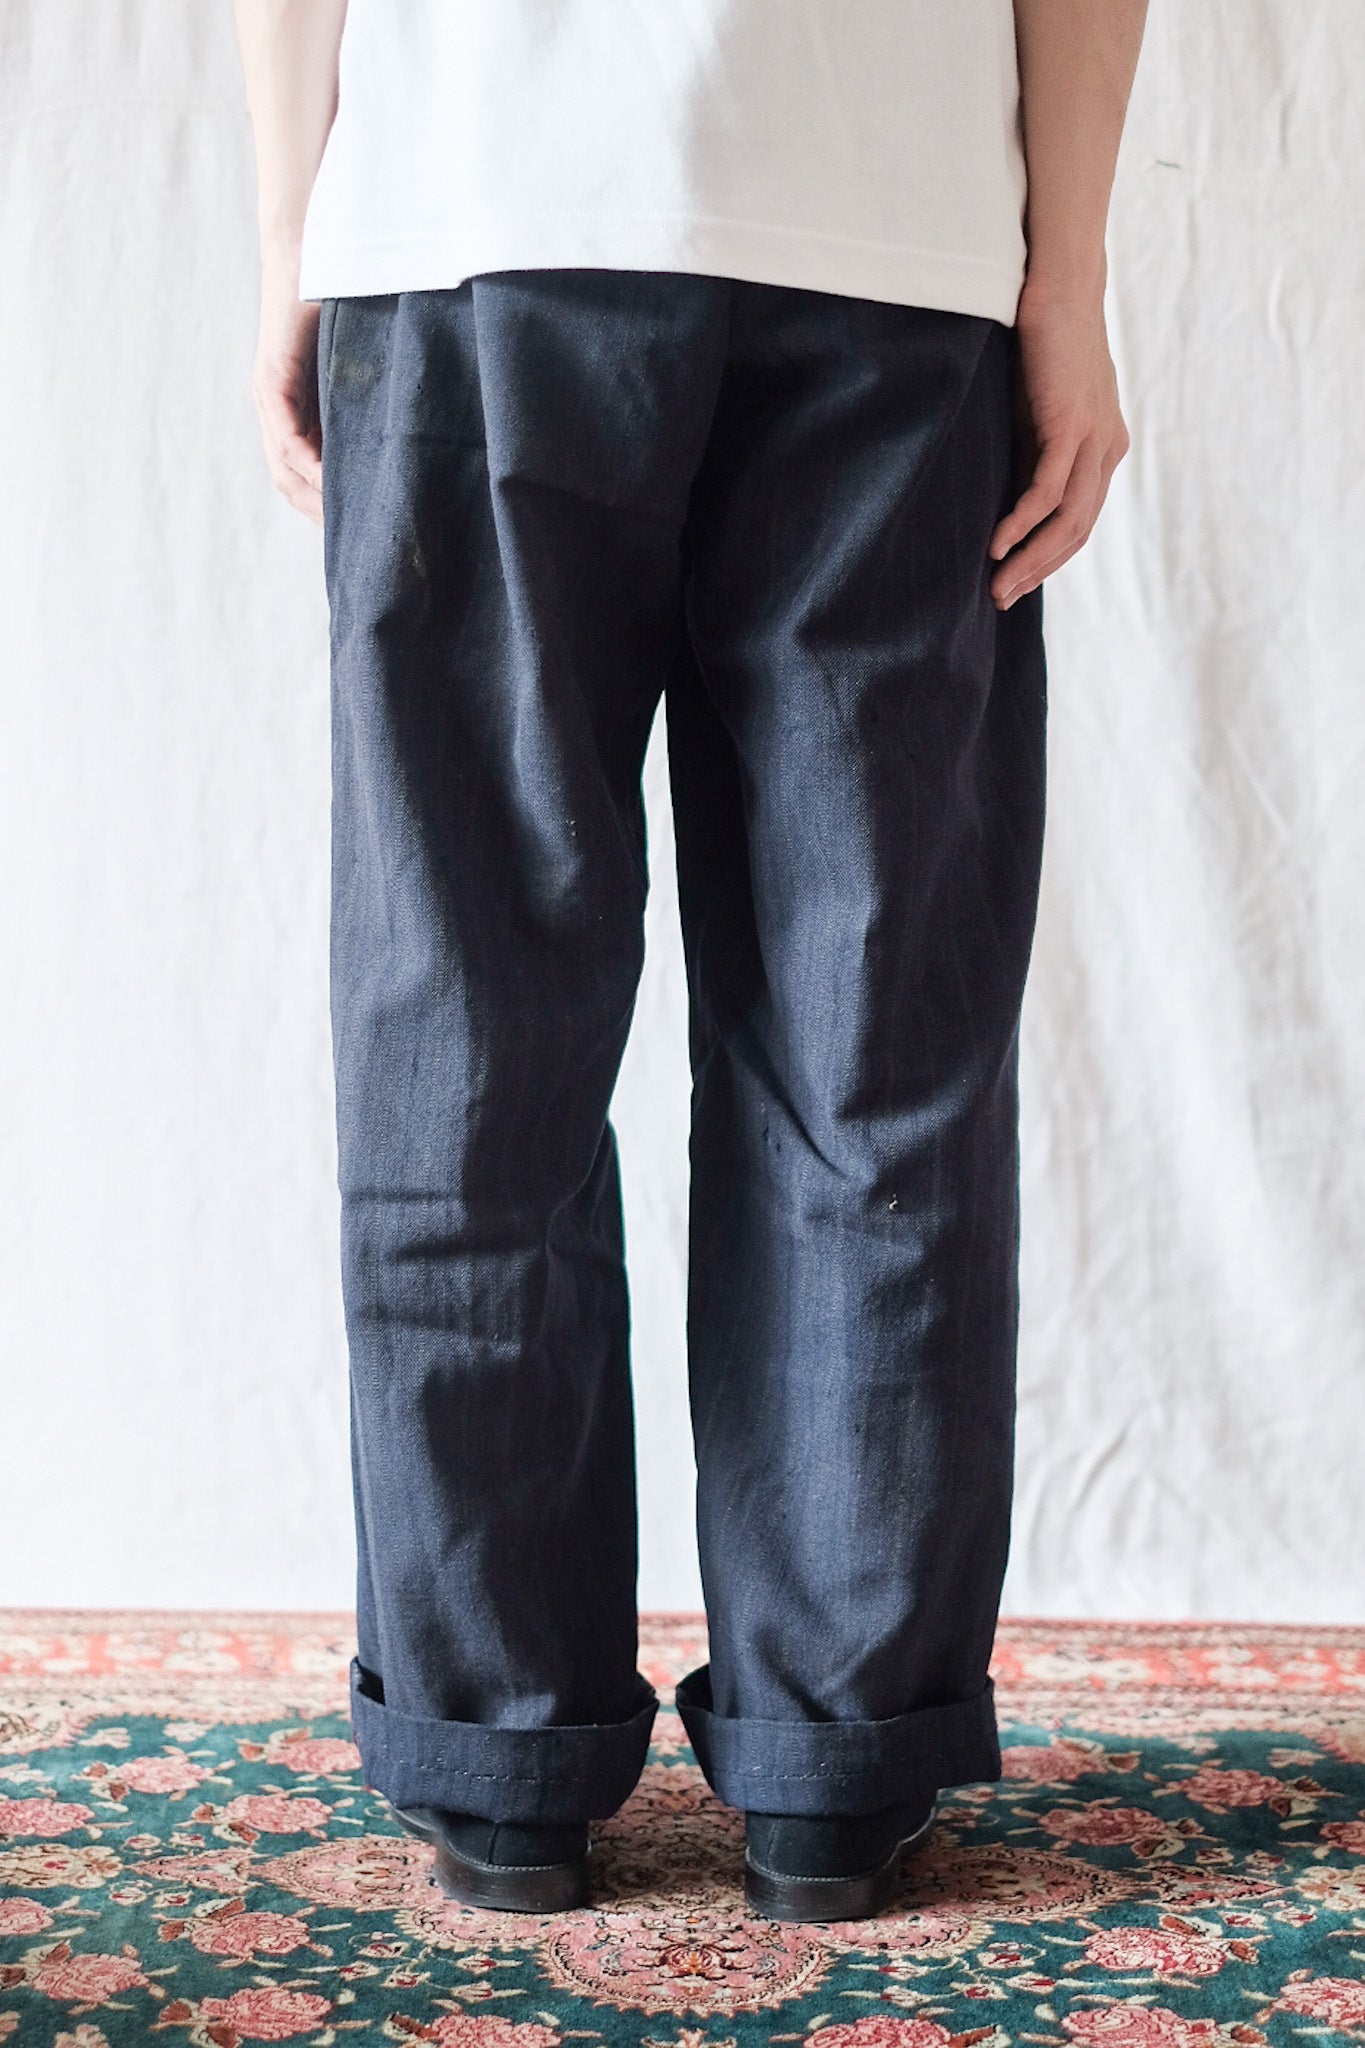 [~ 40's] French Vintage Navy Wool Striped Work Pant